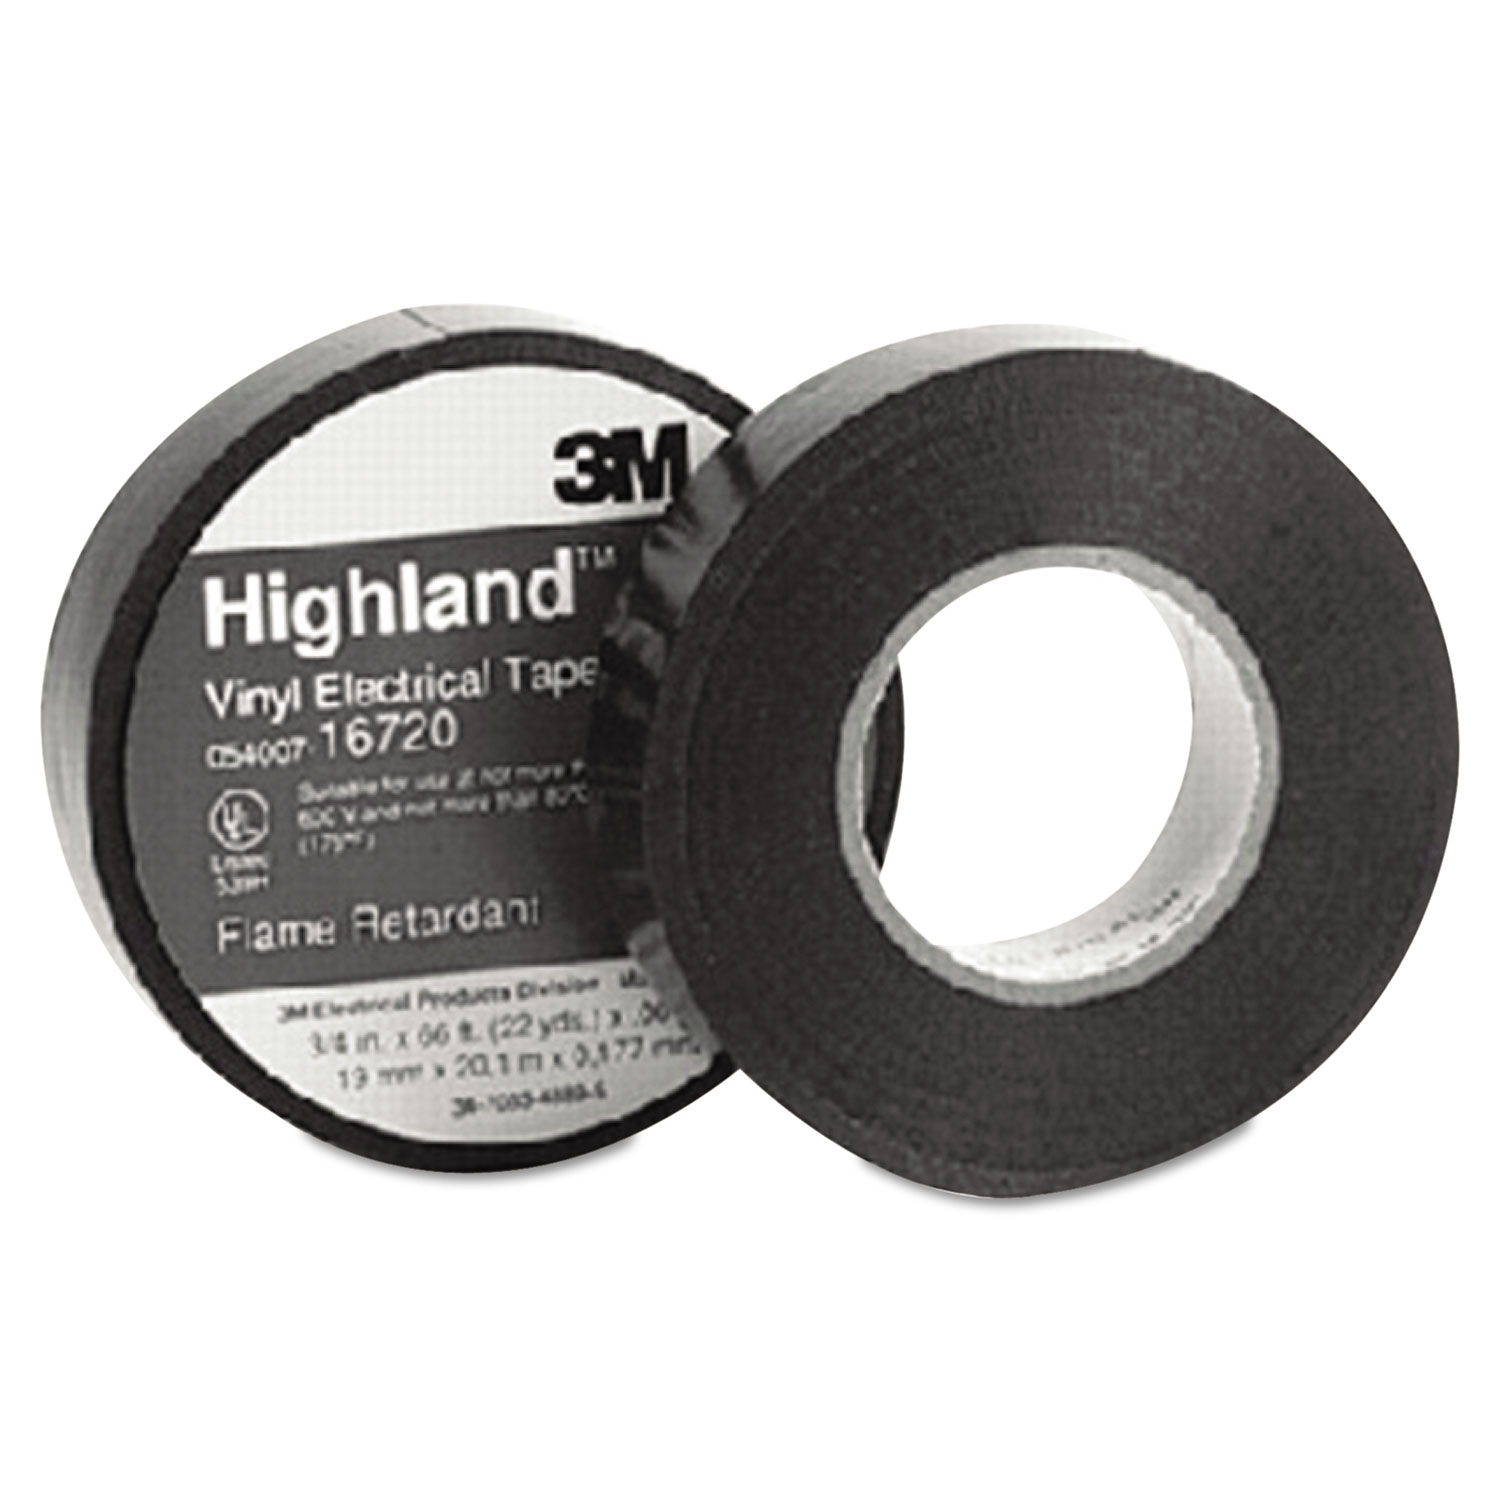 Highland Vinyl Commercial Grade Electrical Tape, 3/4 x 66ft, 1 Core